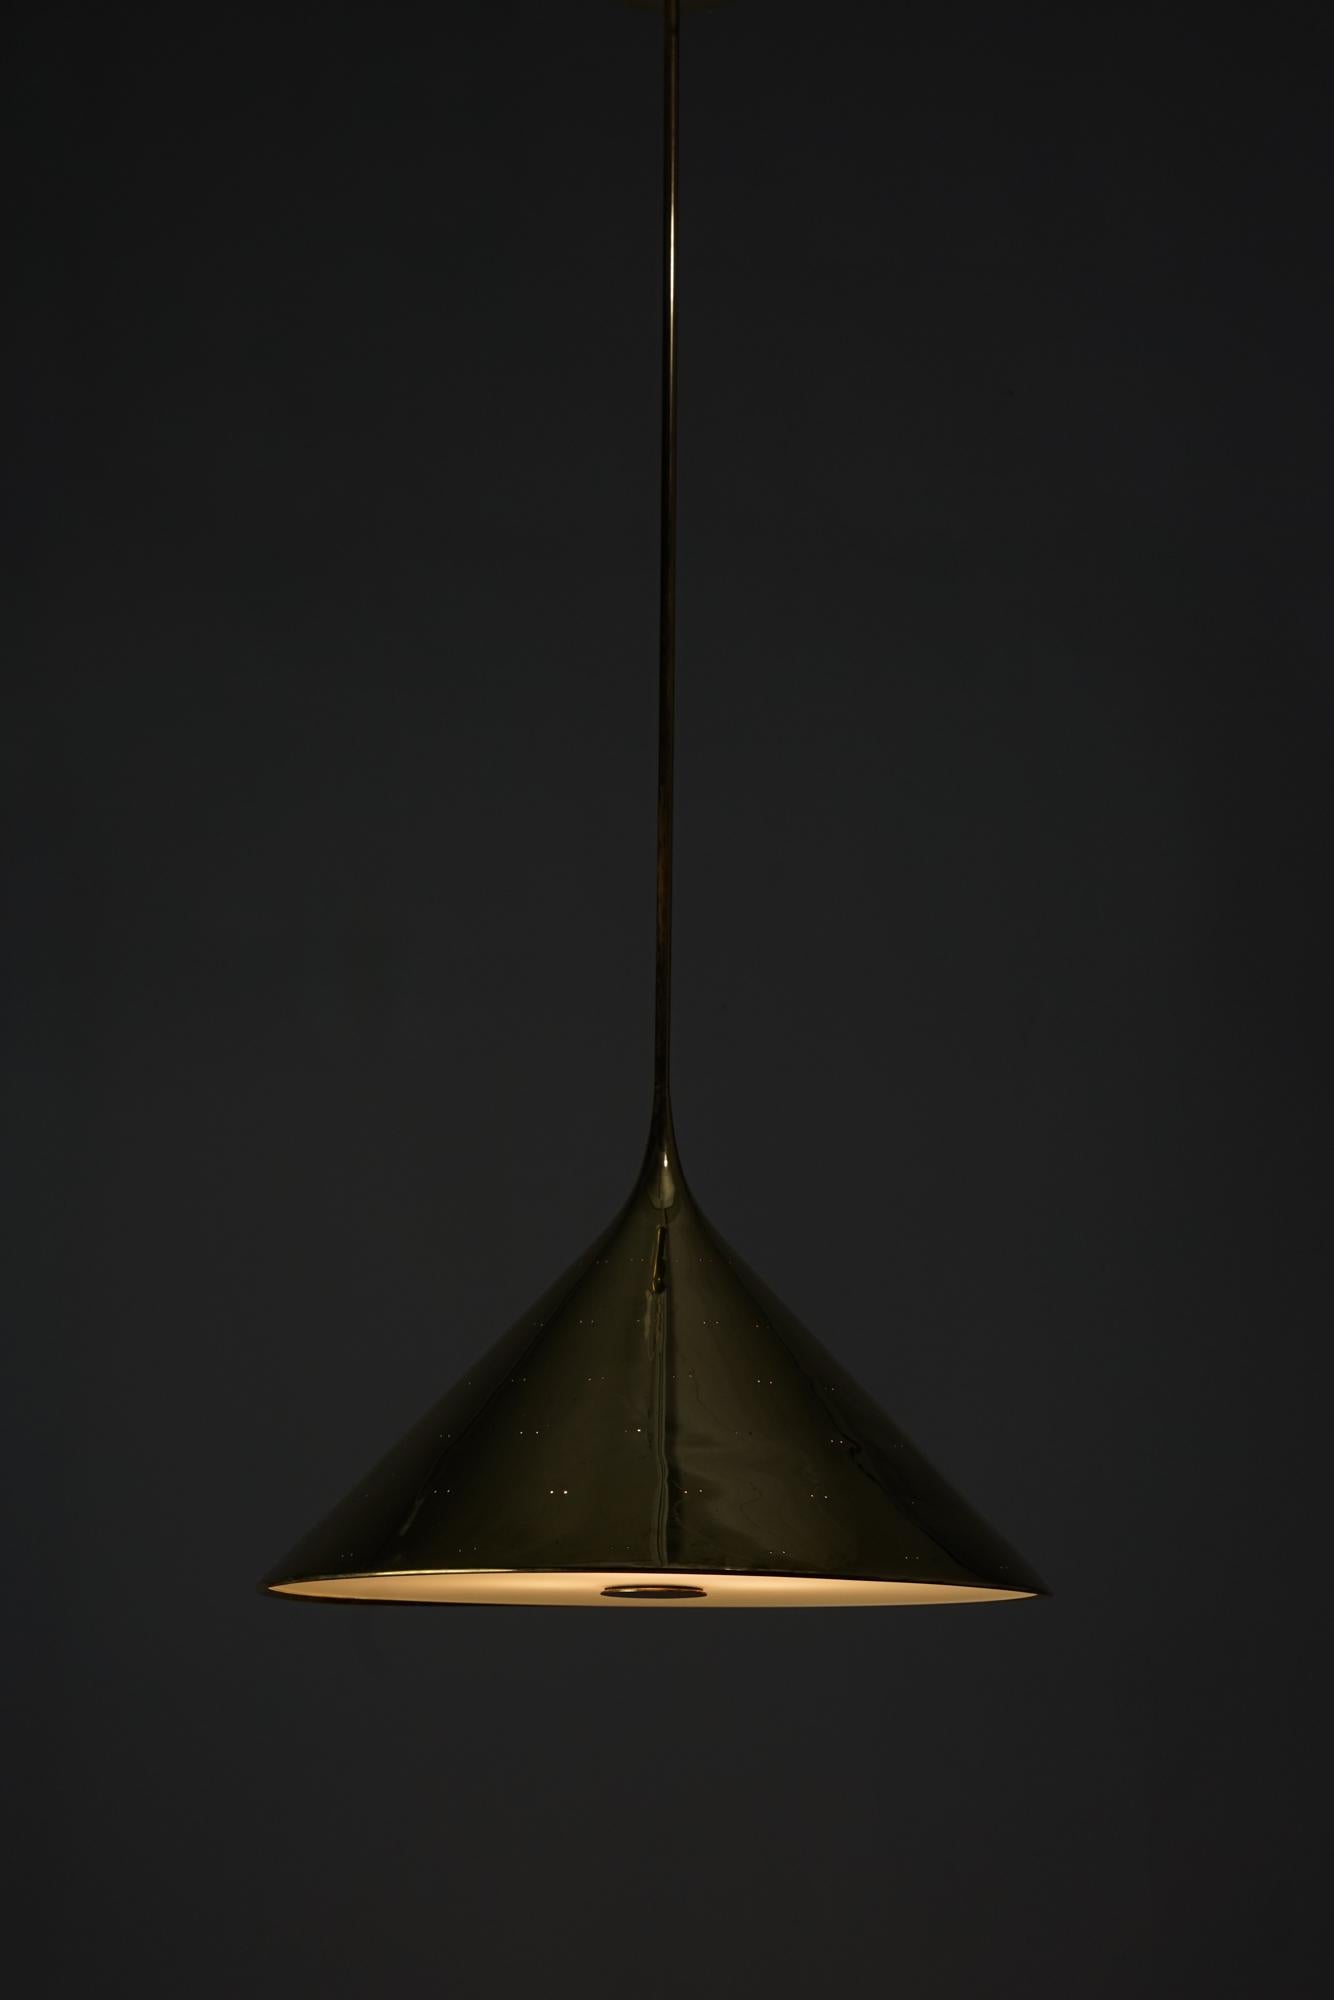 Exceptionally rare pendant by Paavo Tynell. Custom ordered model for the University of Economics in Helsinki. Model created circa 1950. Brass and glass. Good condition with wear consistent with age and use.

The way the light filters through the